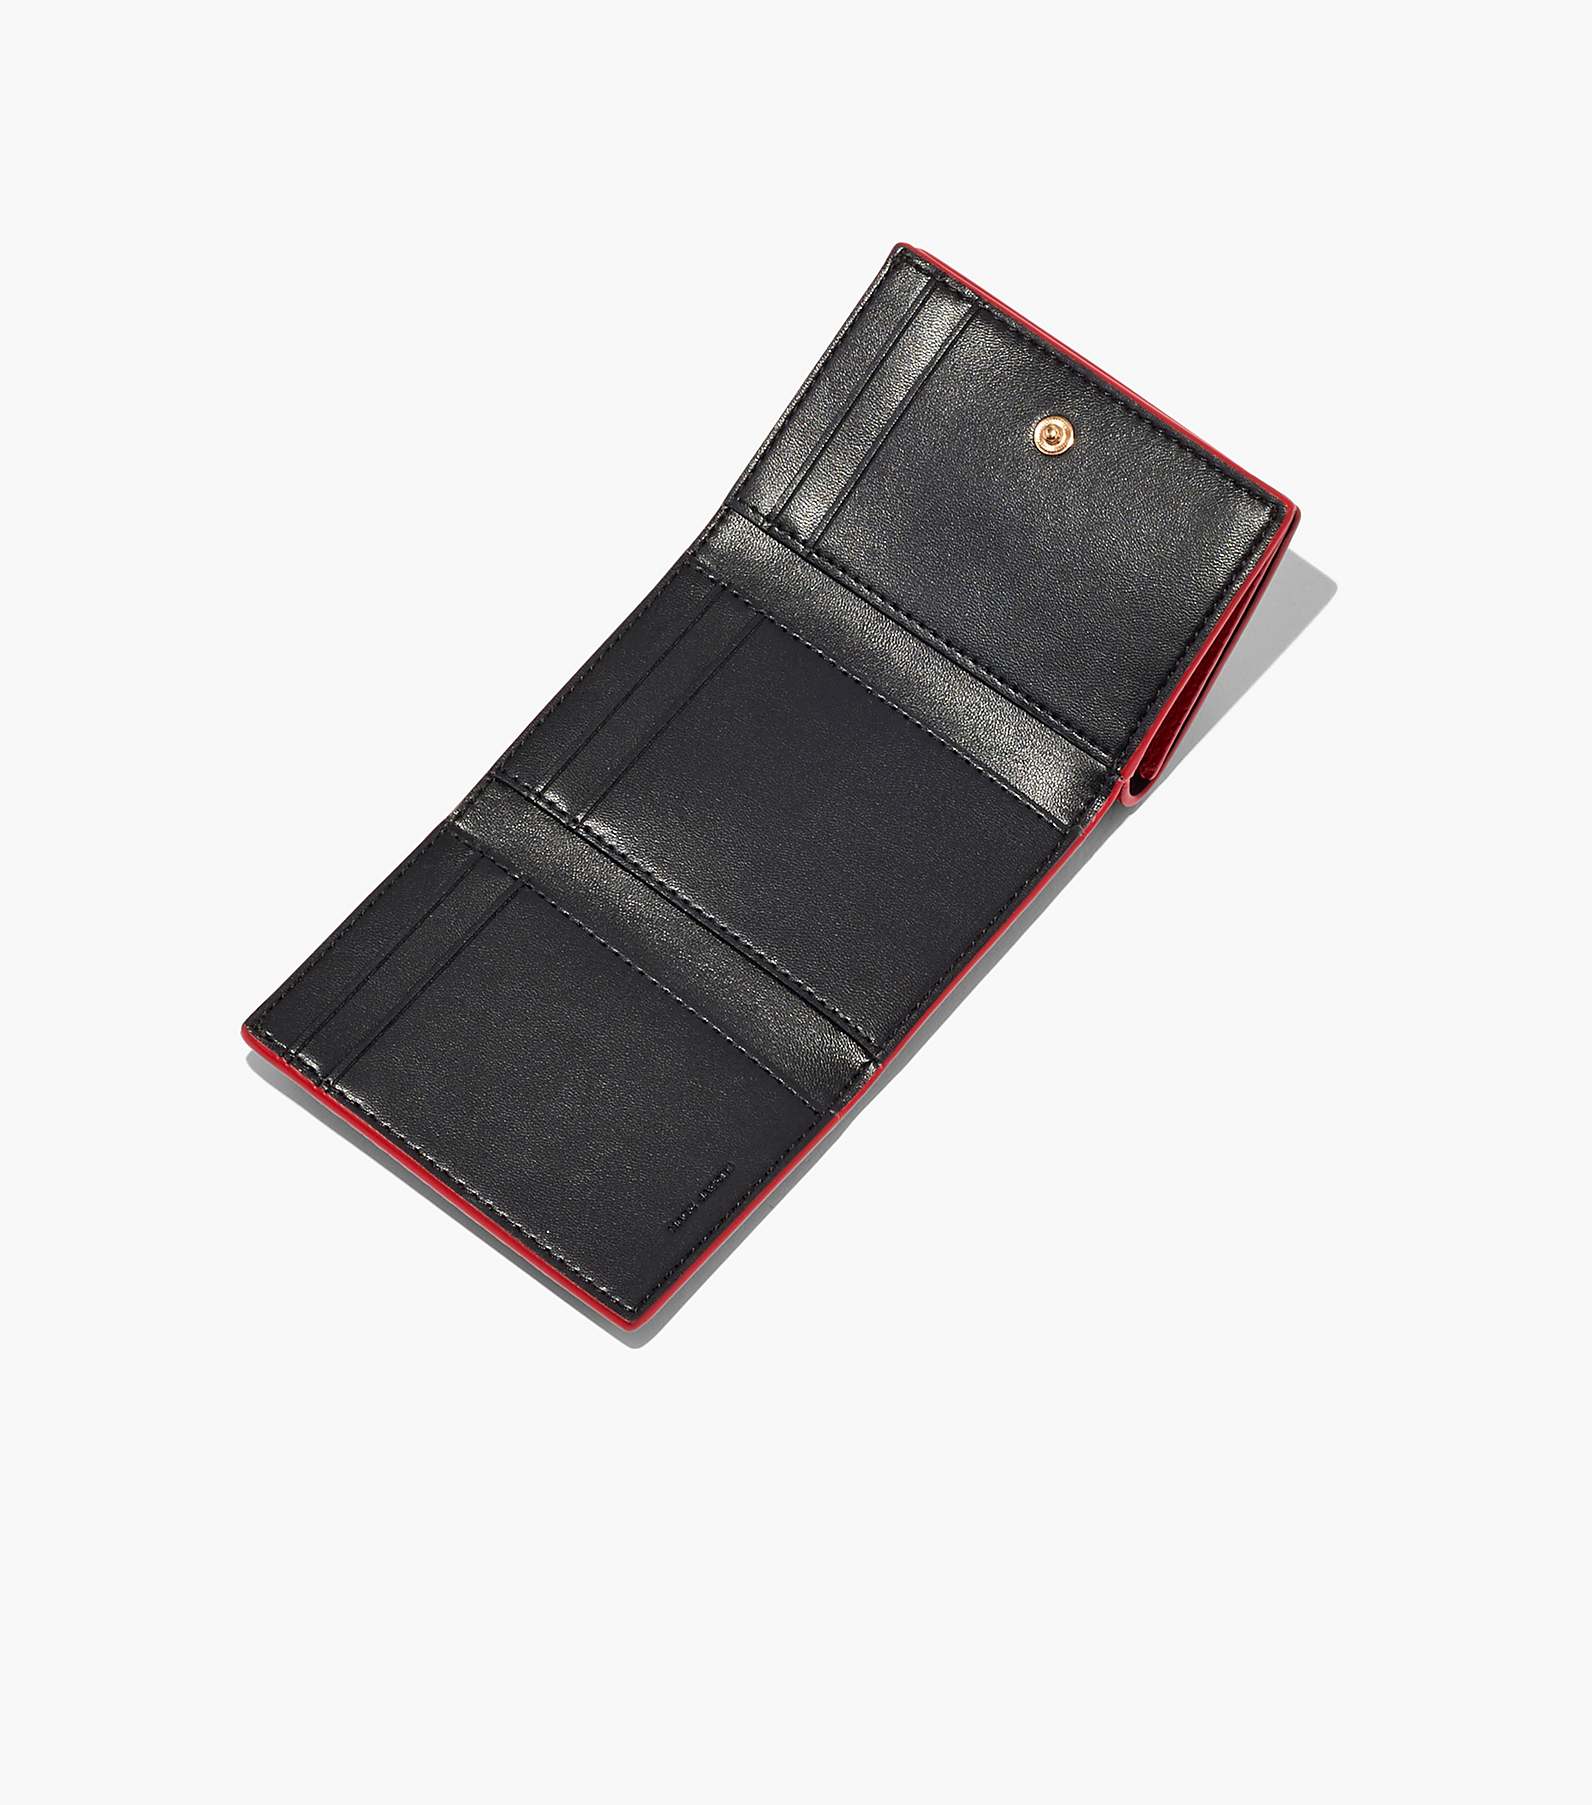 The Leather Medium Trifold Wallet(View All Wallets)